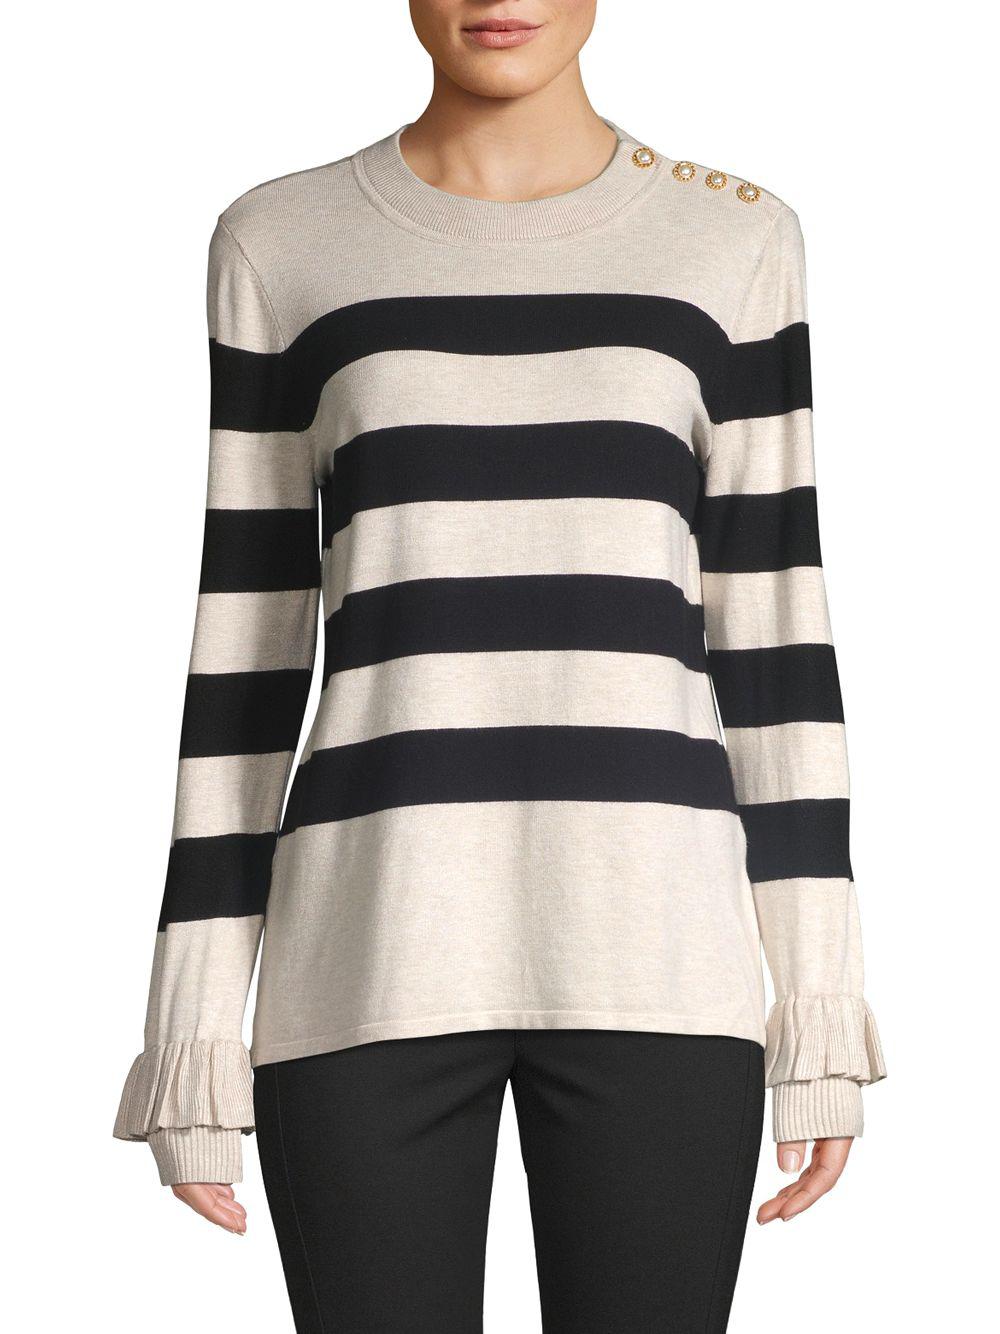 Karl Lagerfeld Synthetic Striped Ruffled Sweater in Beige (Natural) - Lyst